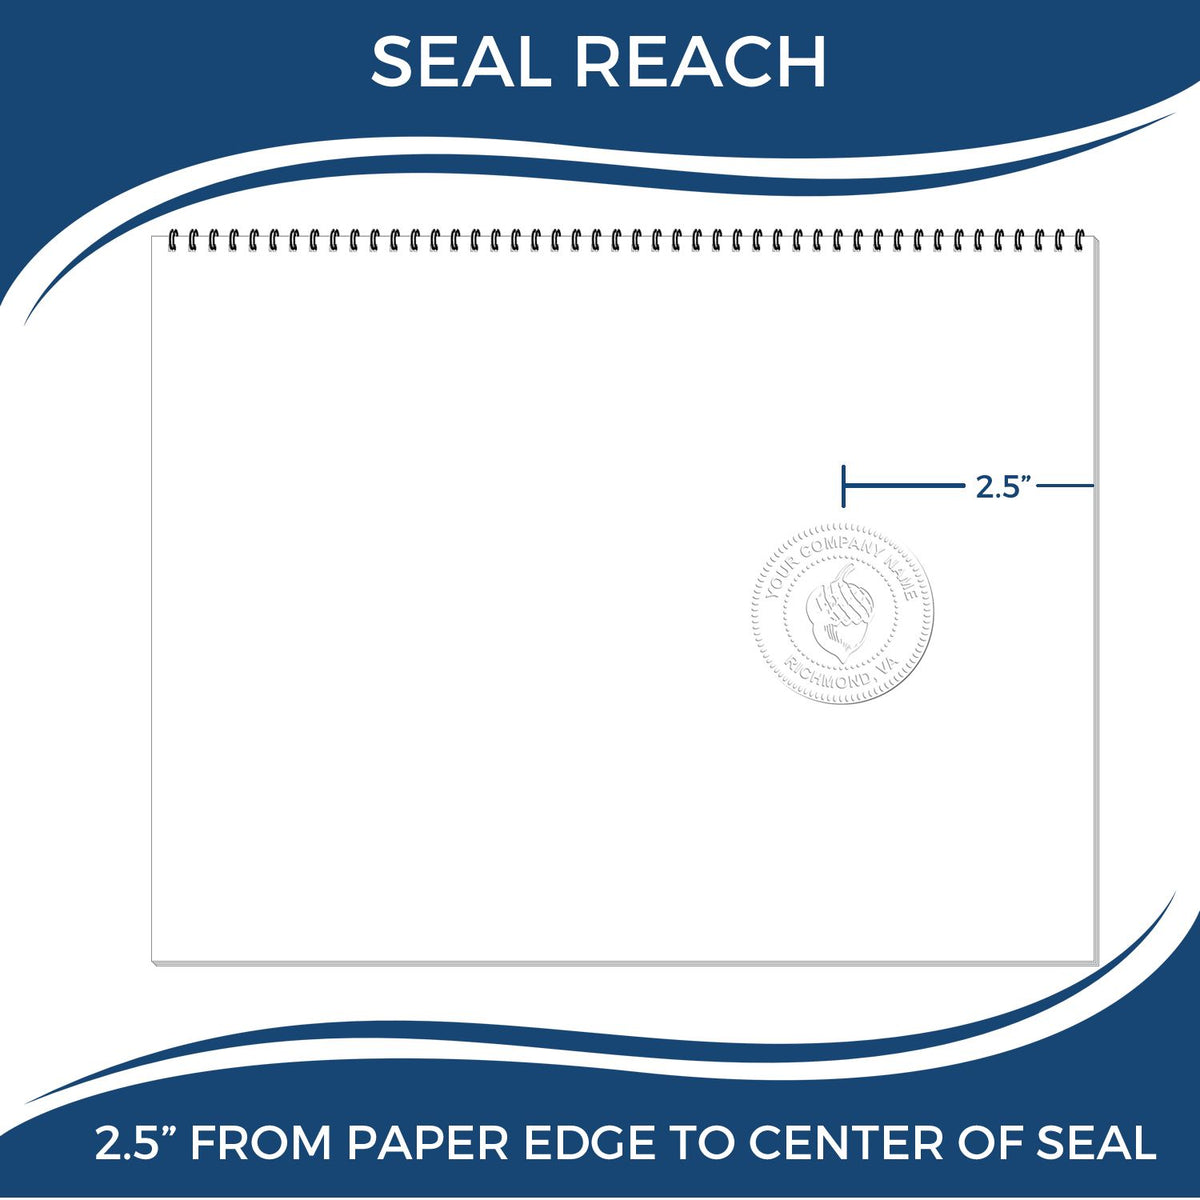 An infographic showing the seal reach which is represented by a ruler and a miniature seal image of the Heavy Duty Cast Iron Louisiana Architect Embosser